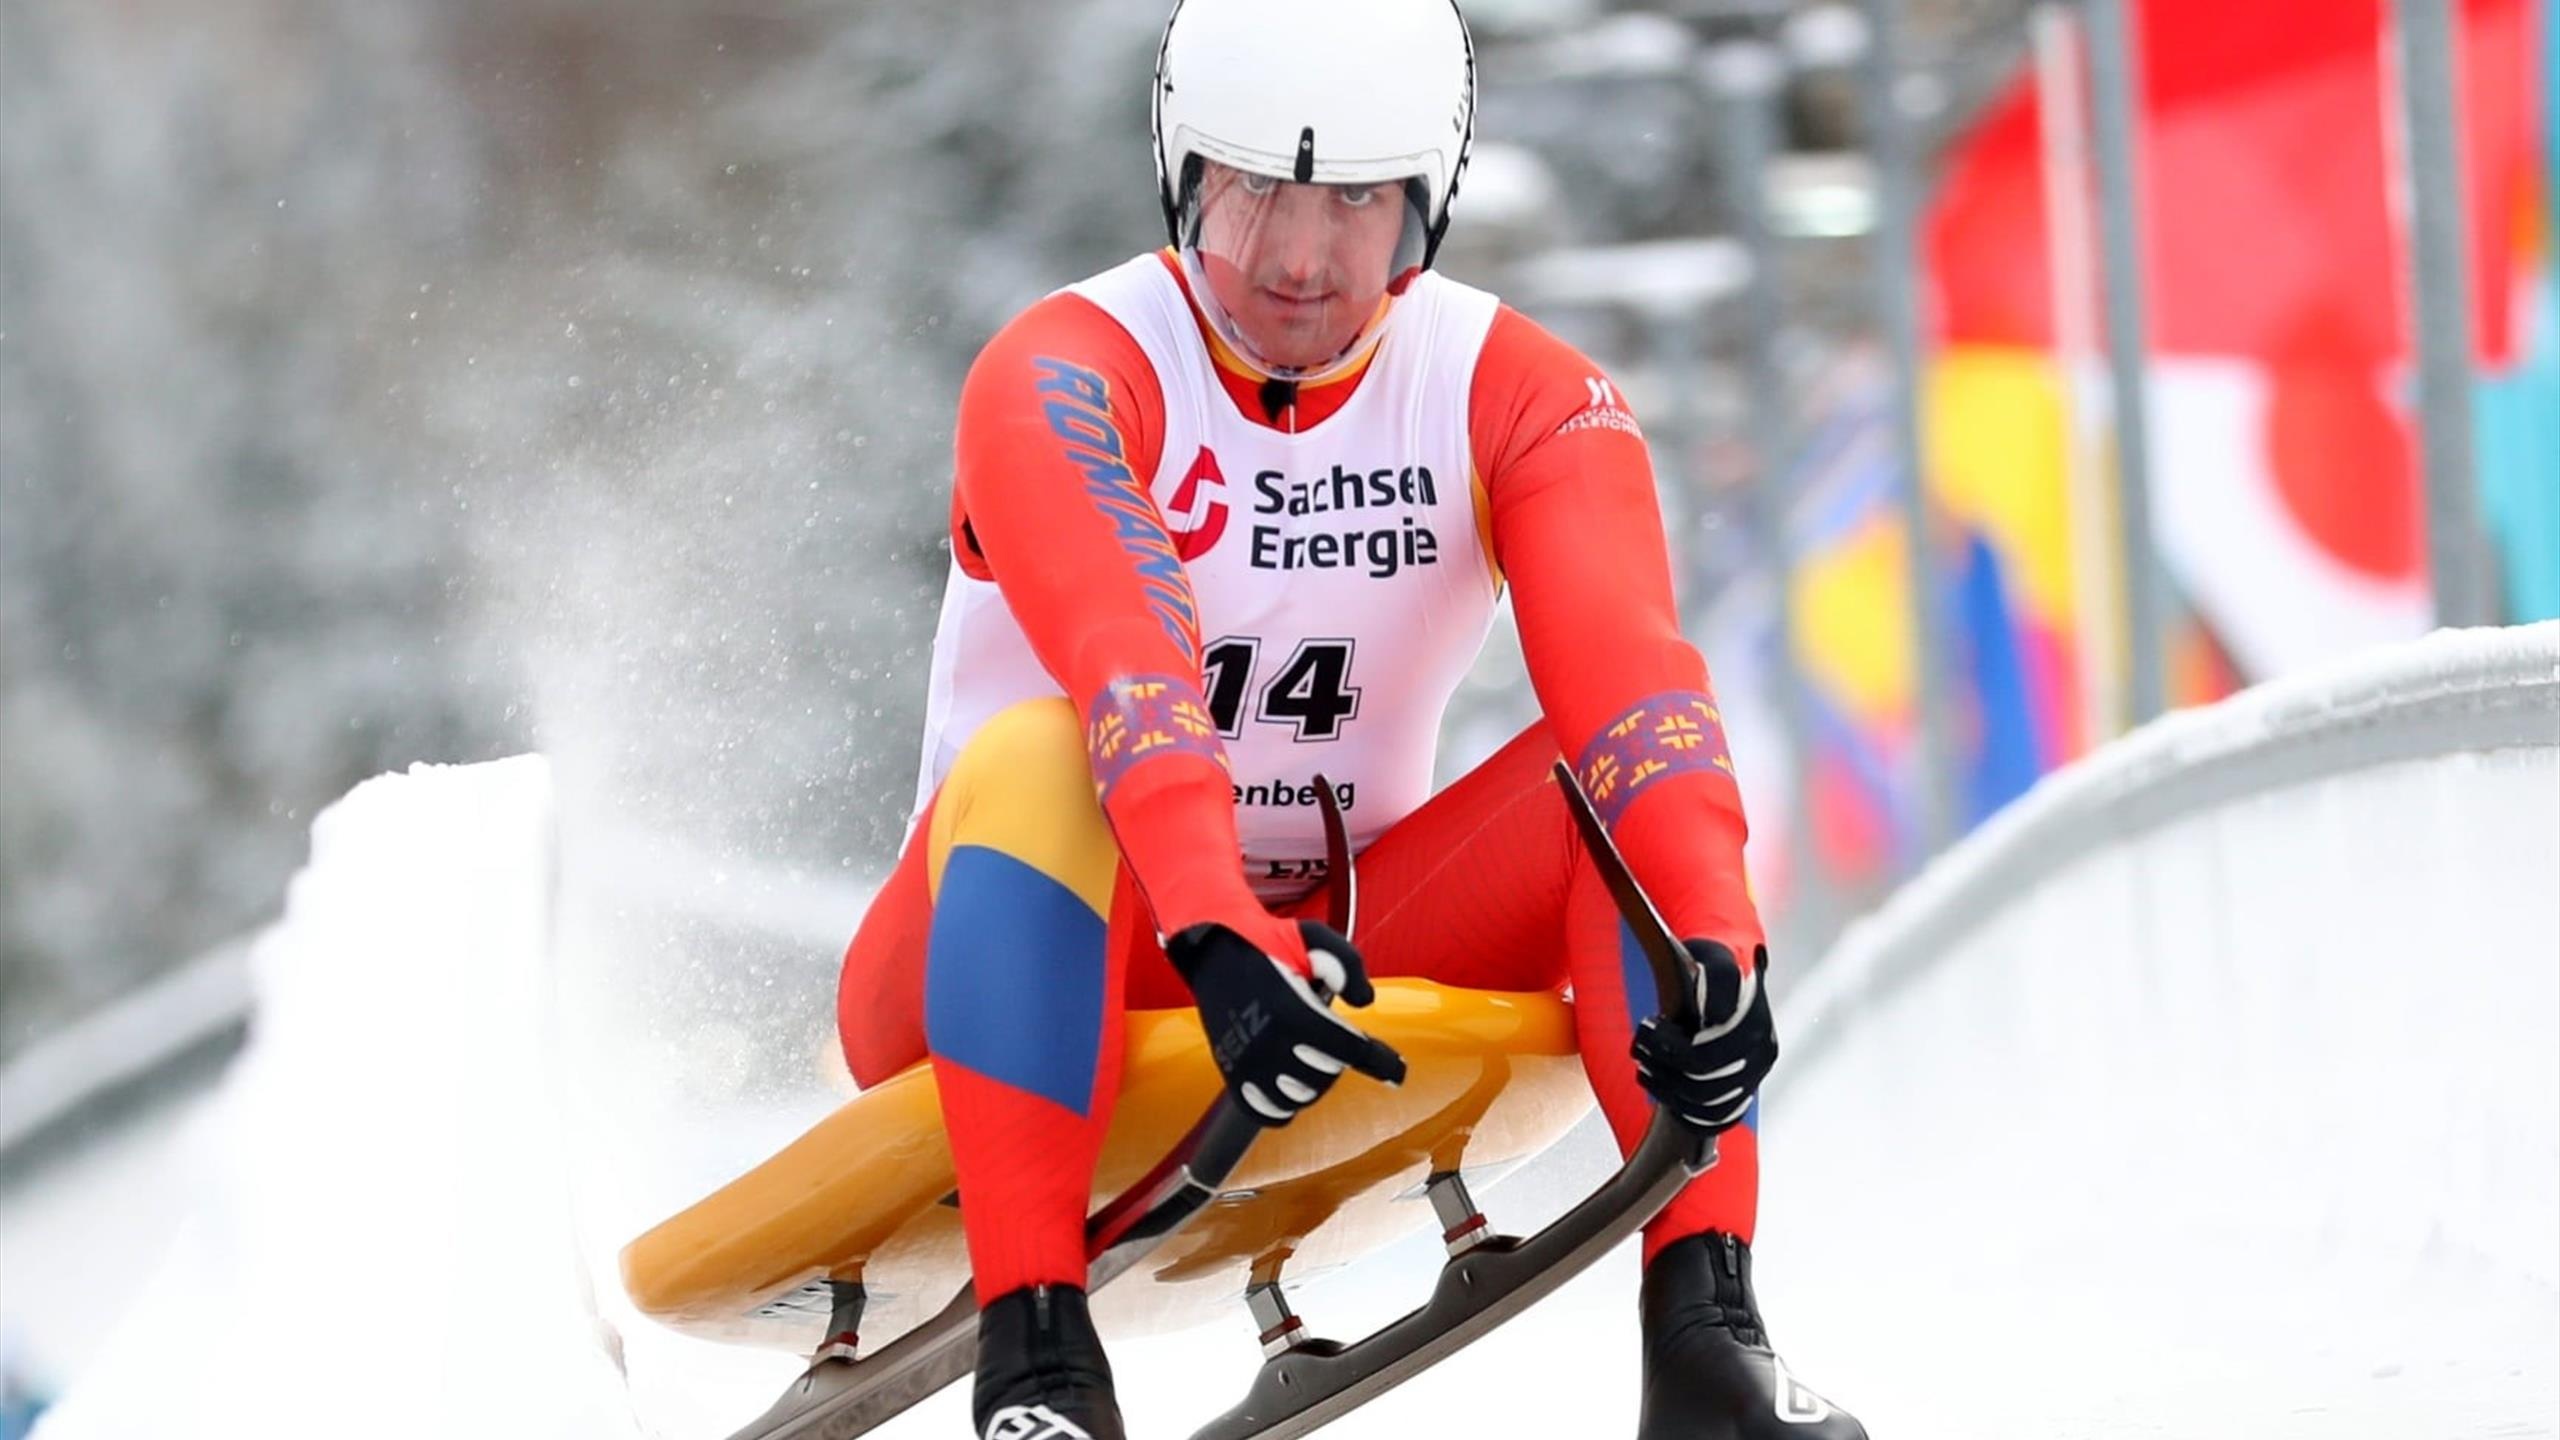 Luge: Valentin Cretu, A Romanian luger who has competed since 2000, The 2010 Winter Olympian. 2560x1440 HD Background.